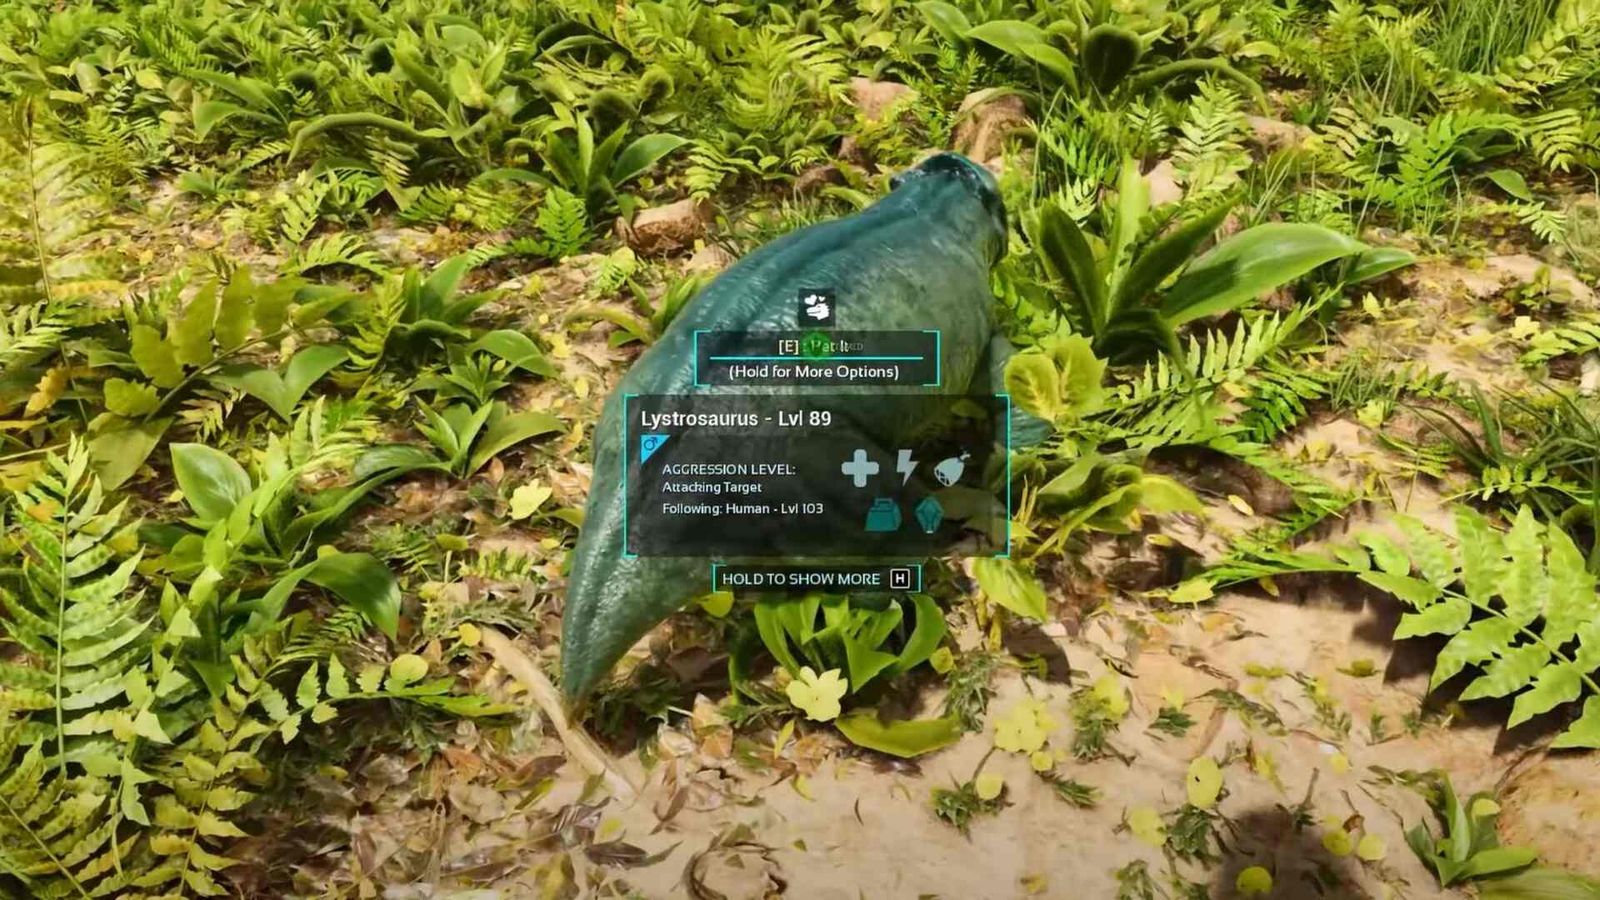 A screenshot from Ark: Survival Ascended showing a small blue dinosaur. There is a text box overlaid which reveals it is a level 89 Lystrosaurus.